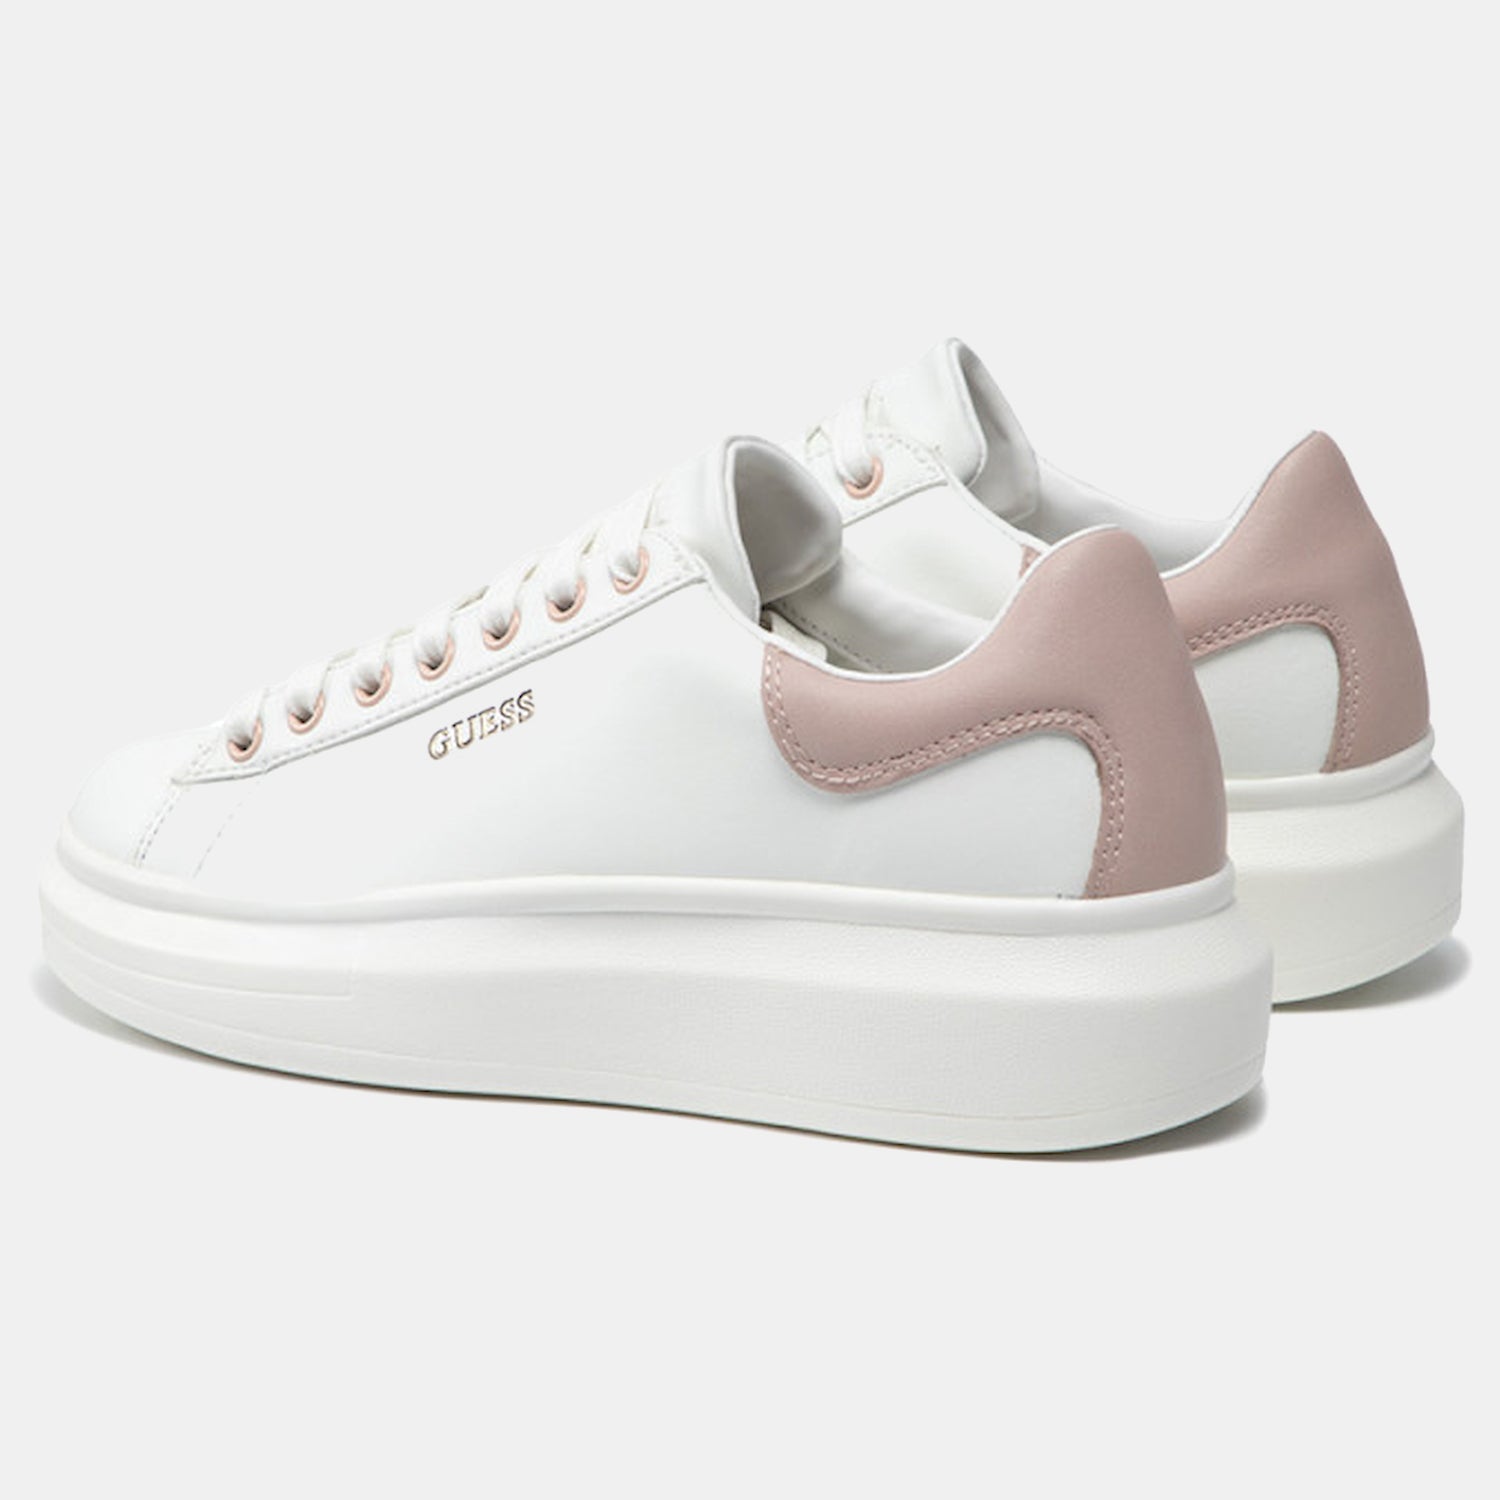 Guess Sapatilhas Sneakers Shoes Fl7rnofal12 Whi Pink Branco Rosa_shot2